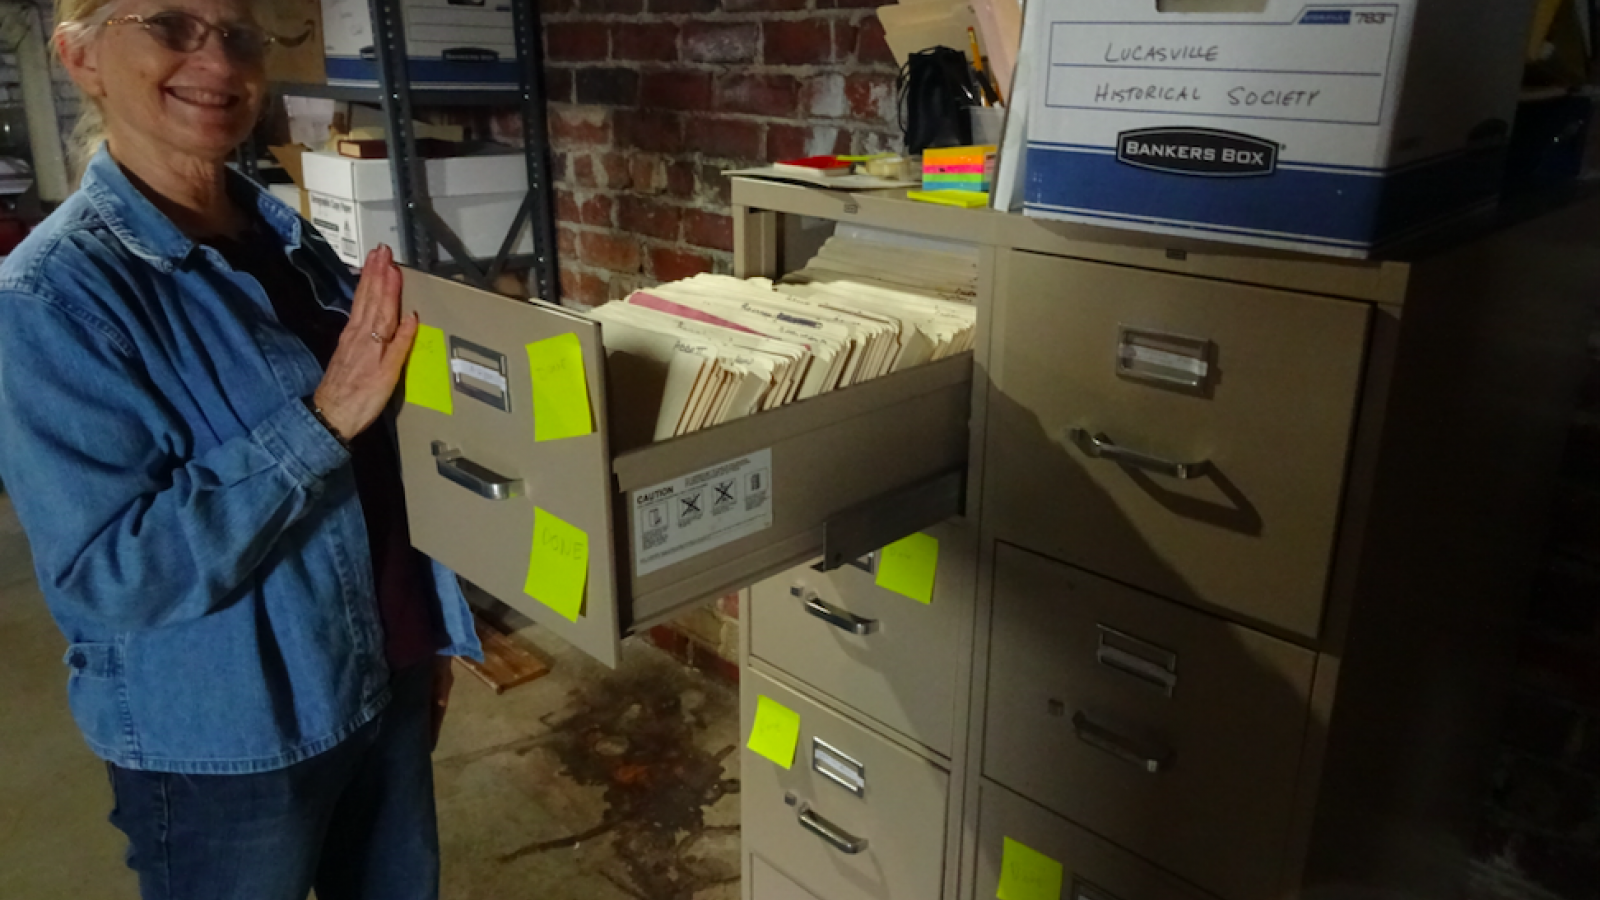 The filing cabinets where Lucasville Historical Society documents are housed.